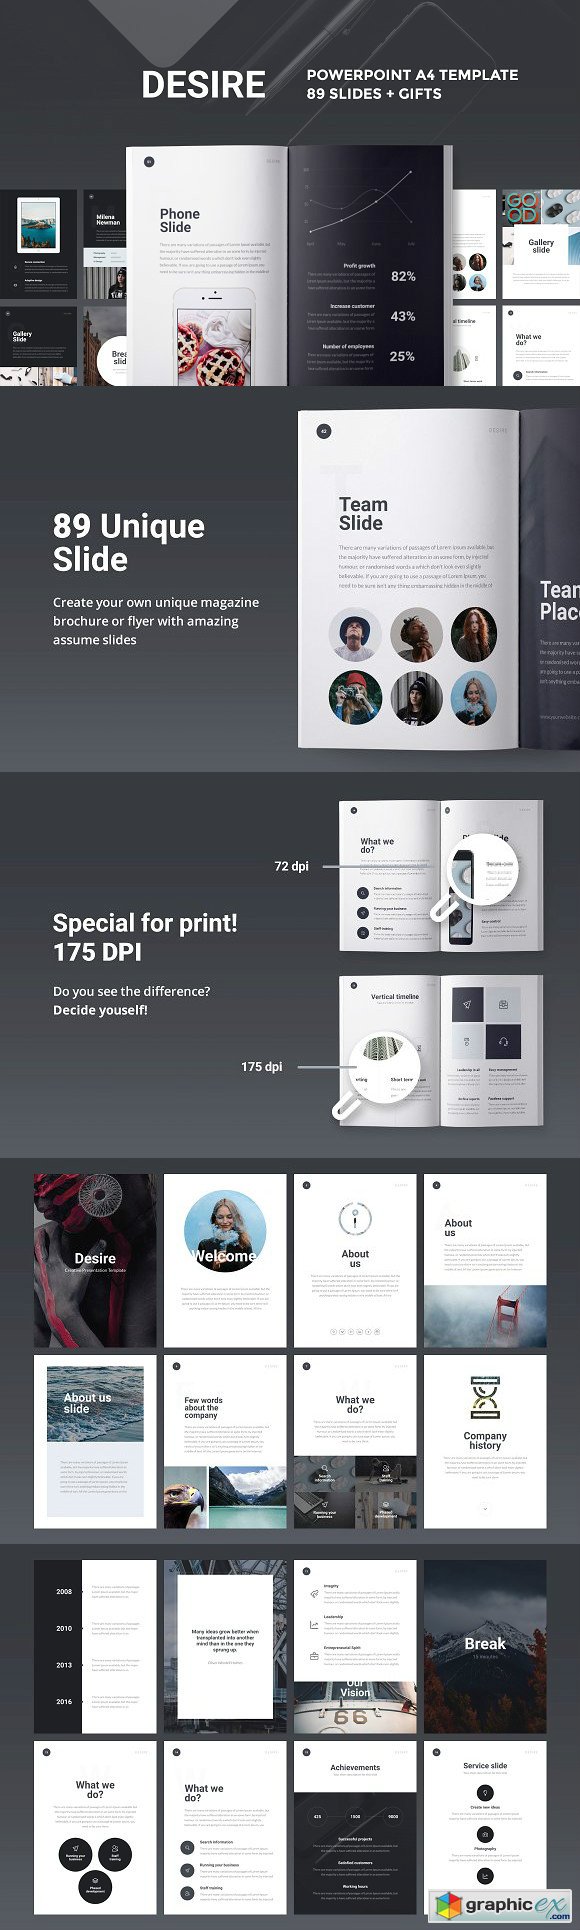 A4 Desire PowerPoint Template